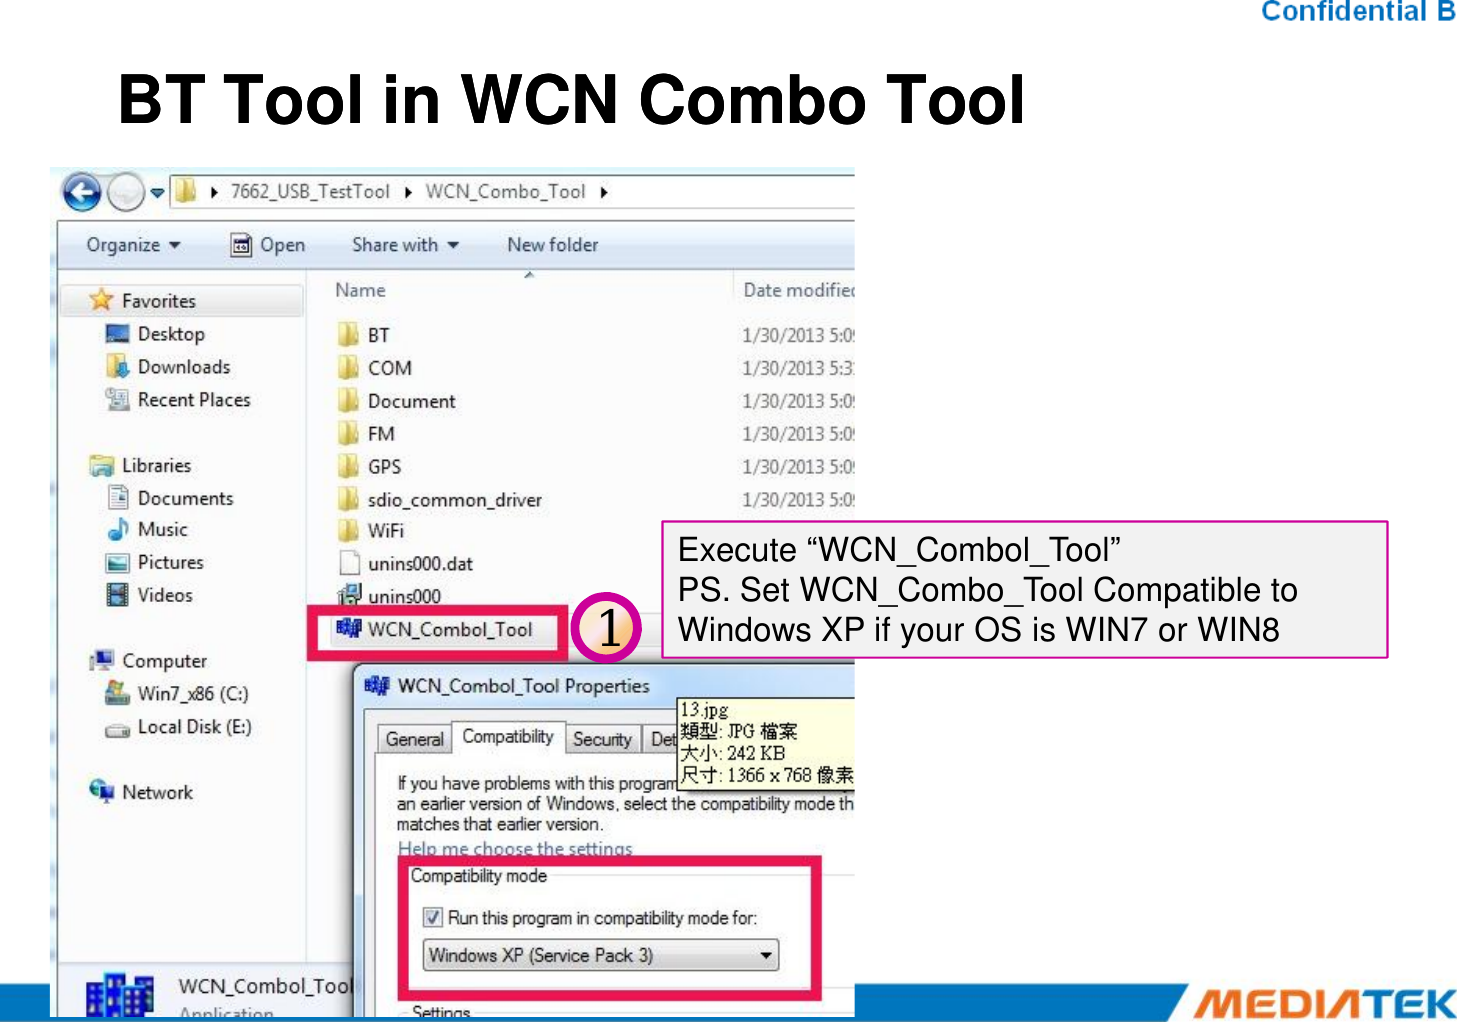 BT Tool in WCN Combo ToolBT Tool in WCN Combo Tool1Execute “WCN_Combol_Tool”PS. Set WCN_Combo_Tool Compatible to Windows XP if your OS is WIN7 or WIN8